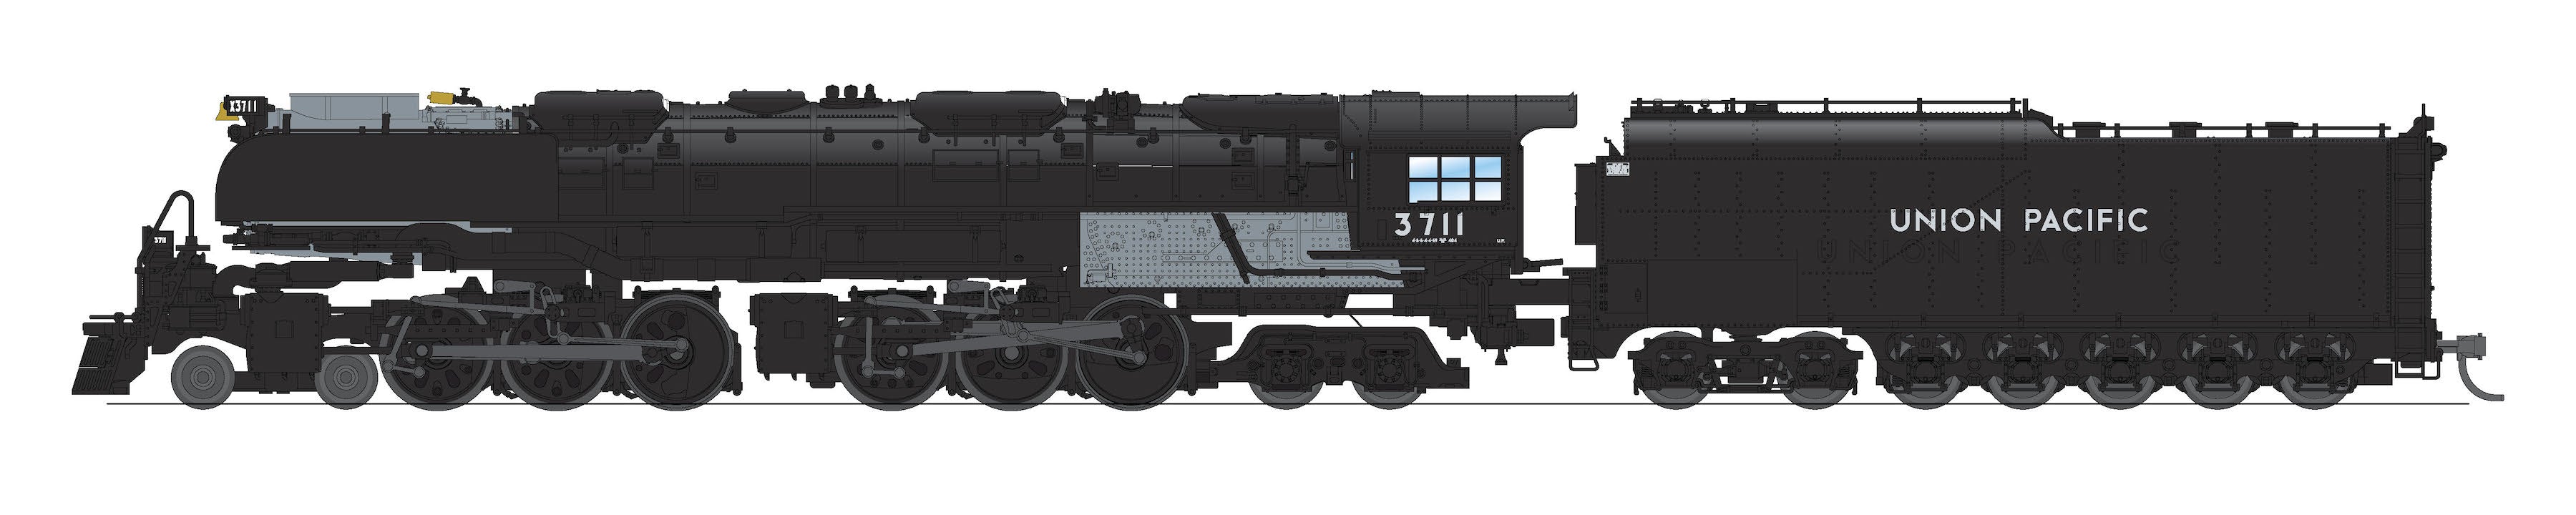 6982 UP Challenger 4-6-6-4, #3711, Black & Graphite, Oil Tender, w/ wind wings, Paragon4 Sound/DC/DCC, Smoke, N